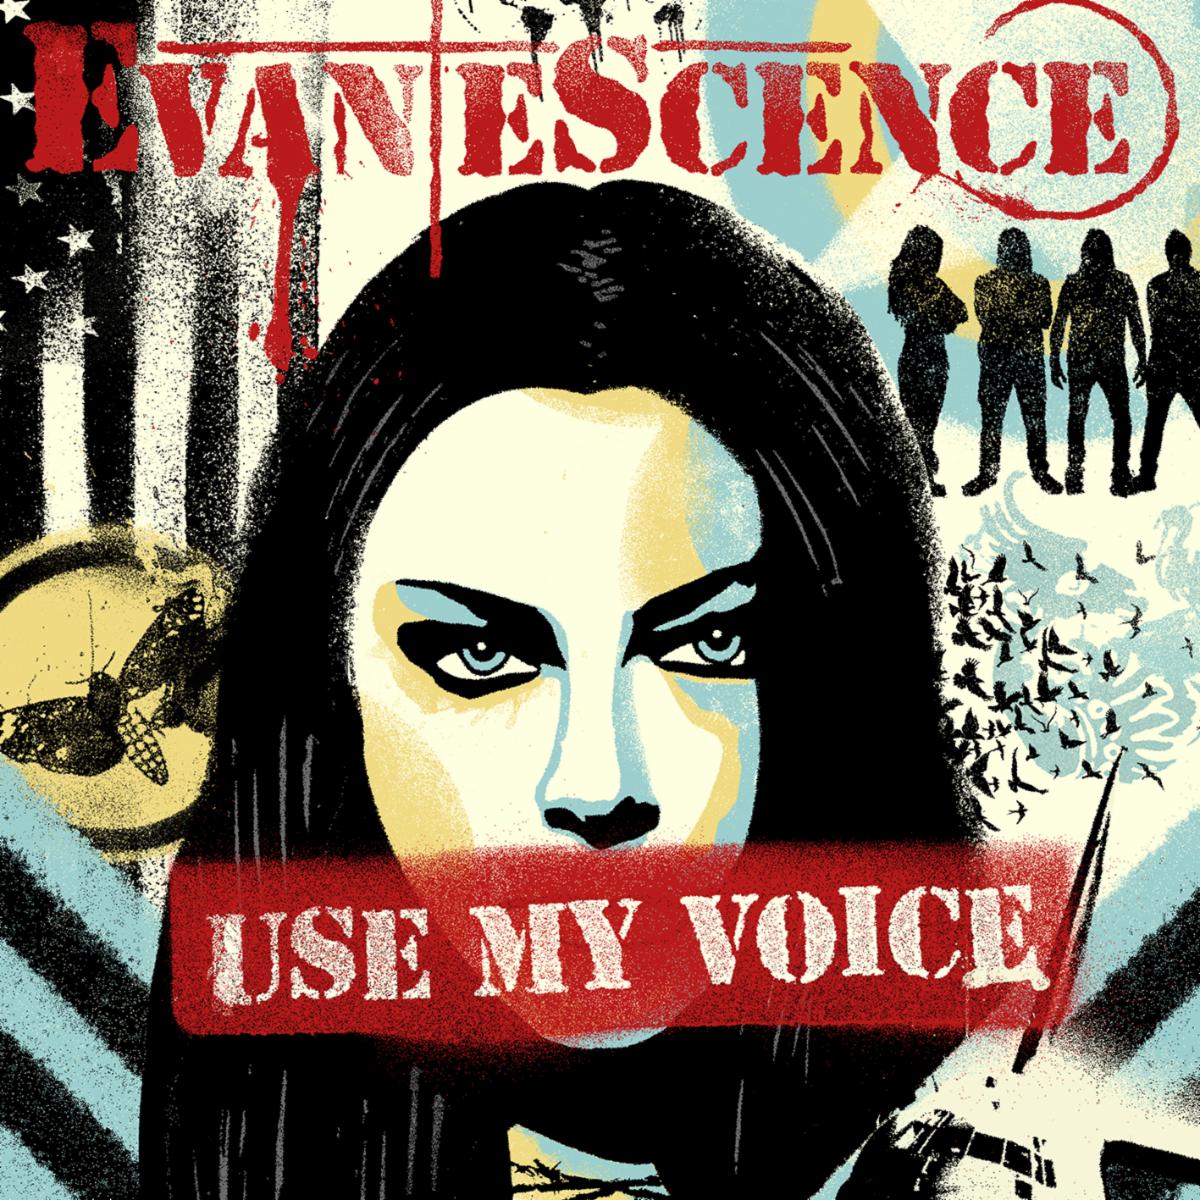 Evanescence & Rock's Top Women Release "Use My Voice"